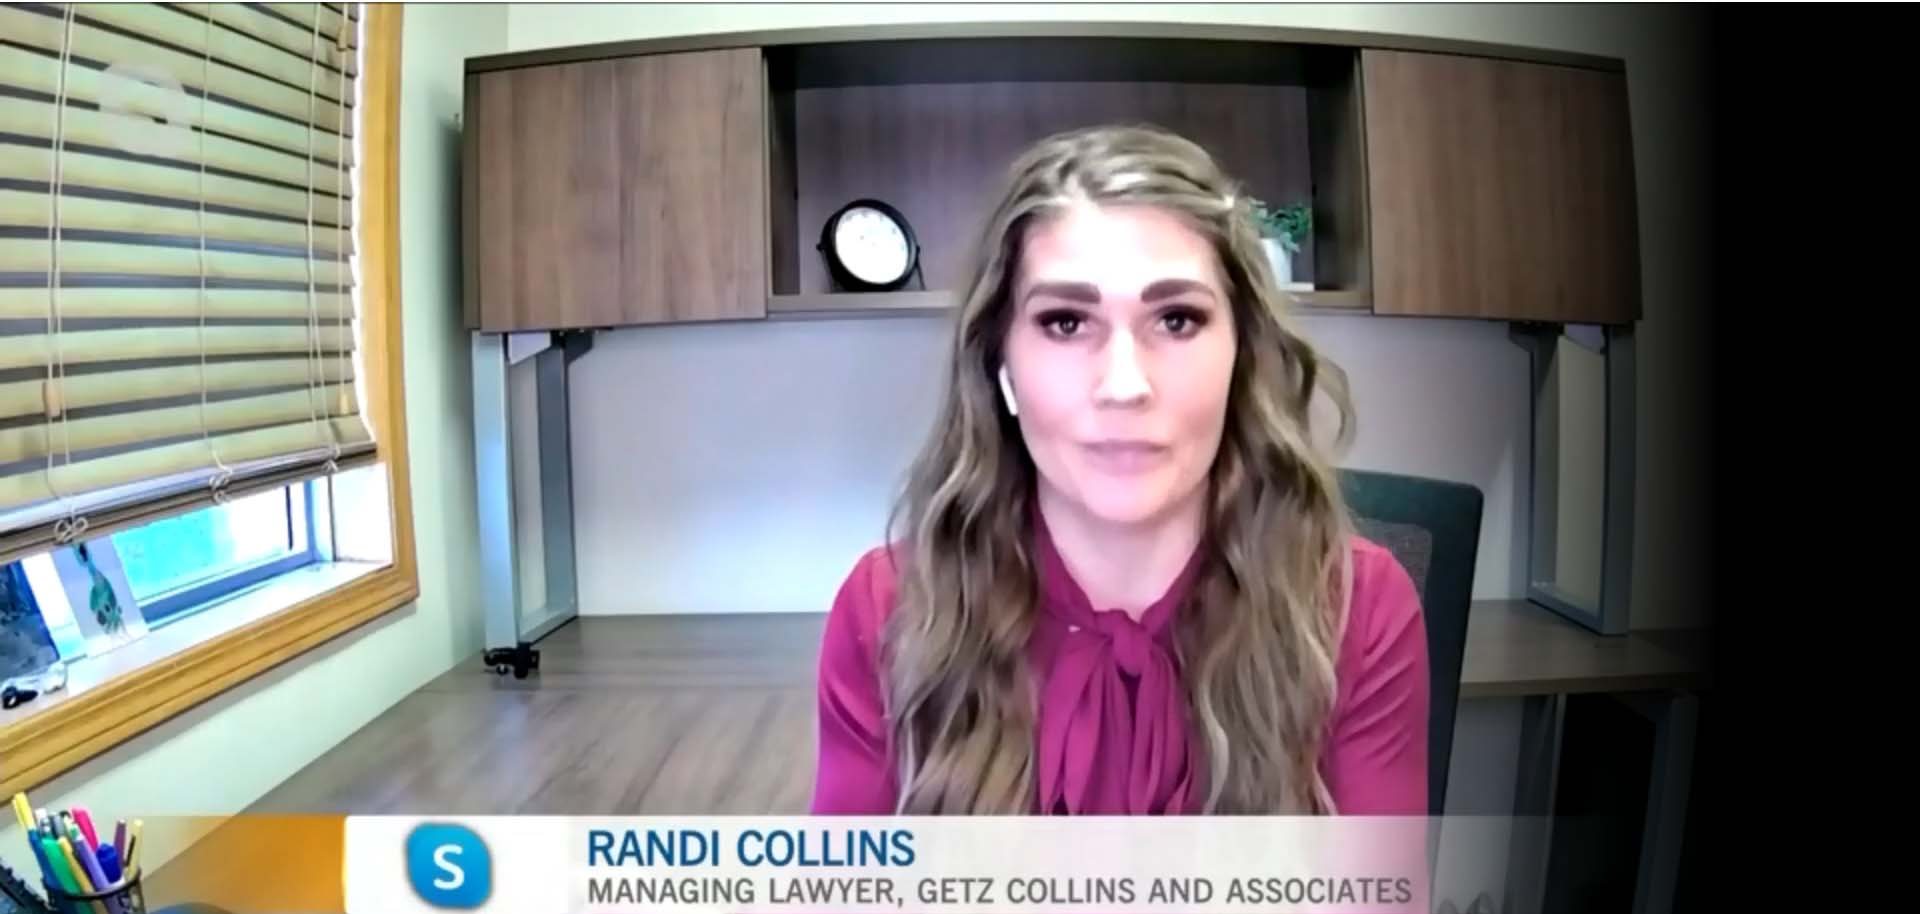 Randi Collins appeared on CTV Morning Live Calgary to discuss returning to the workplace after COVID